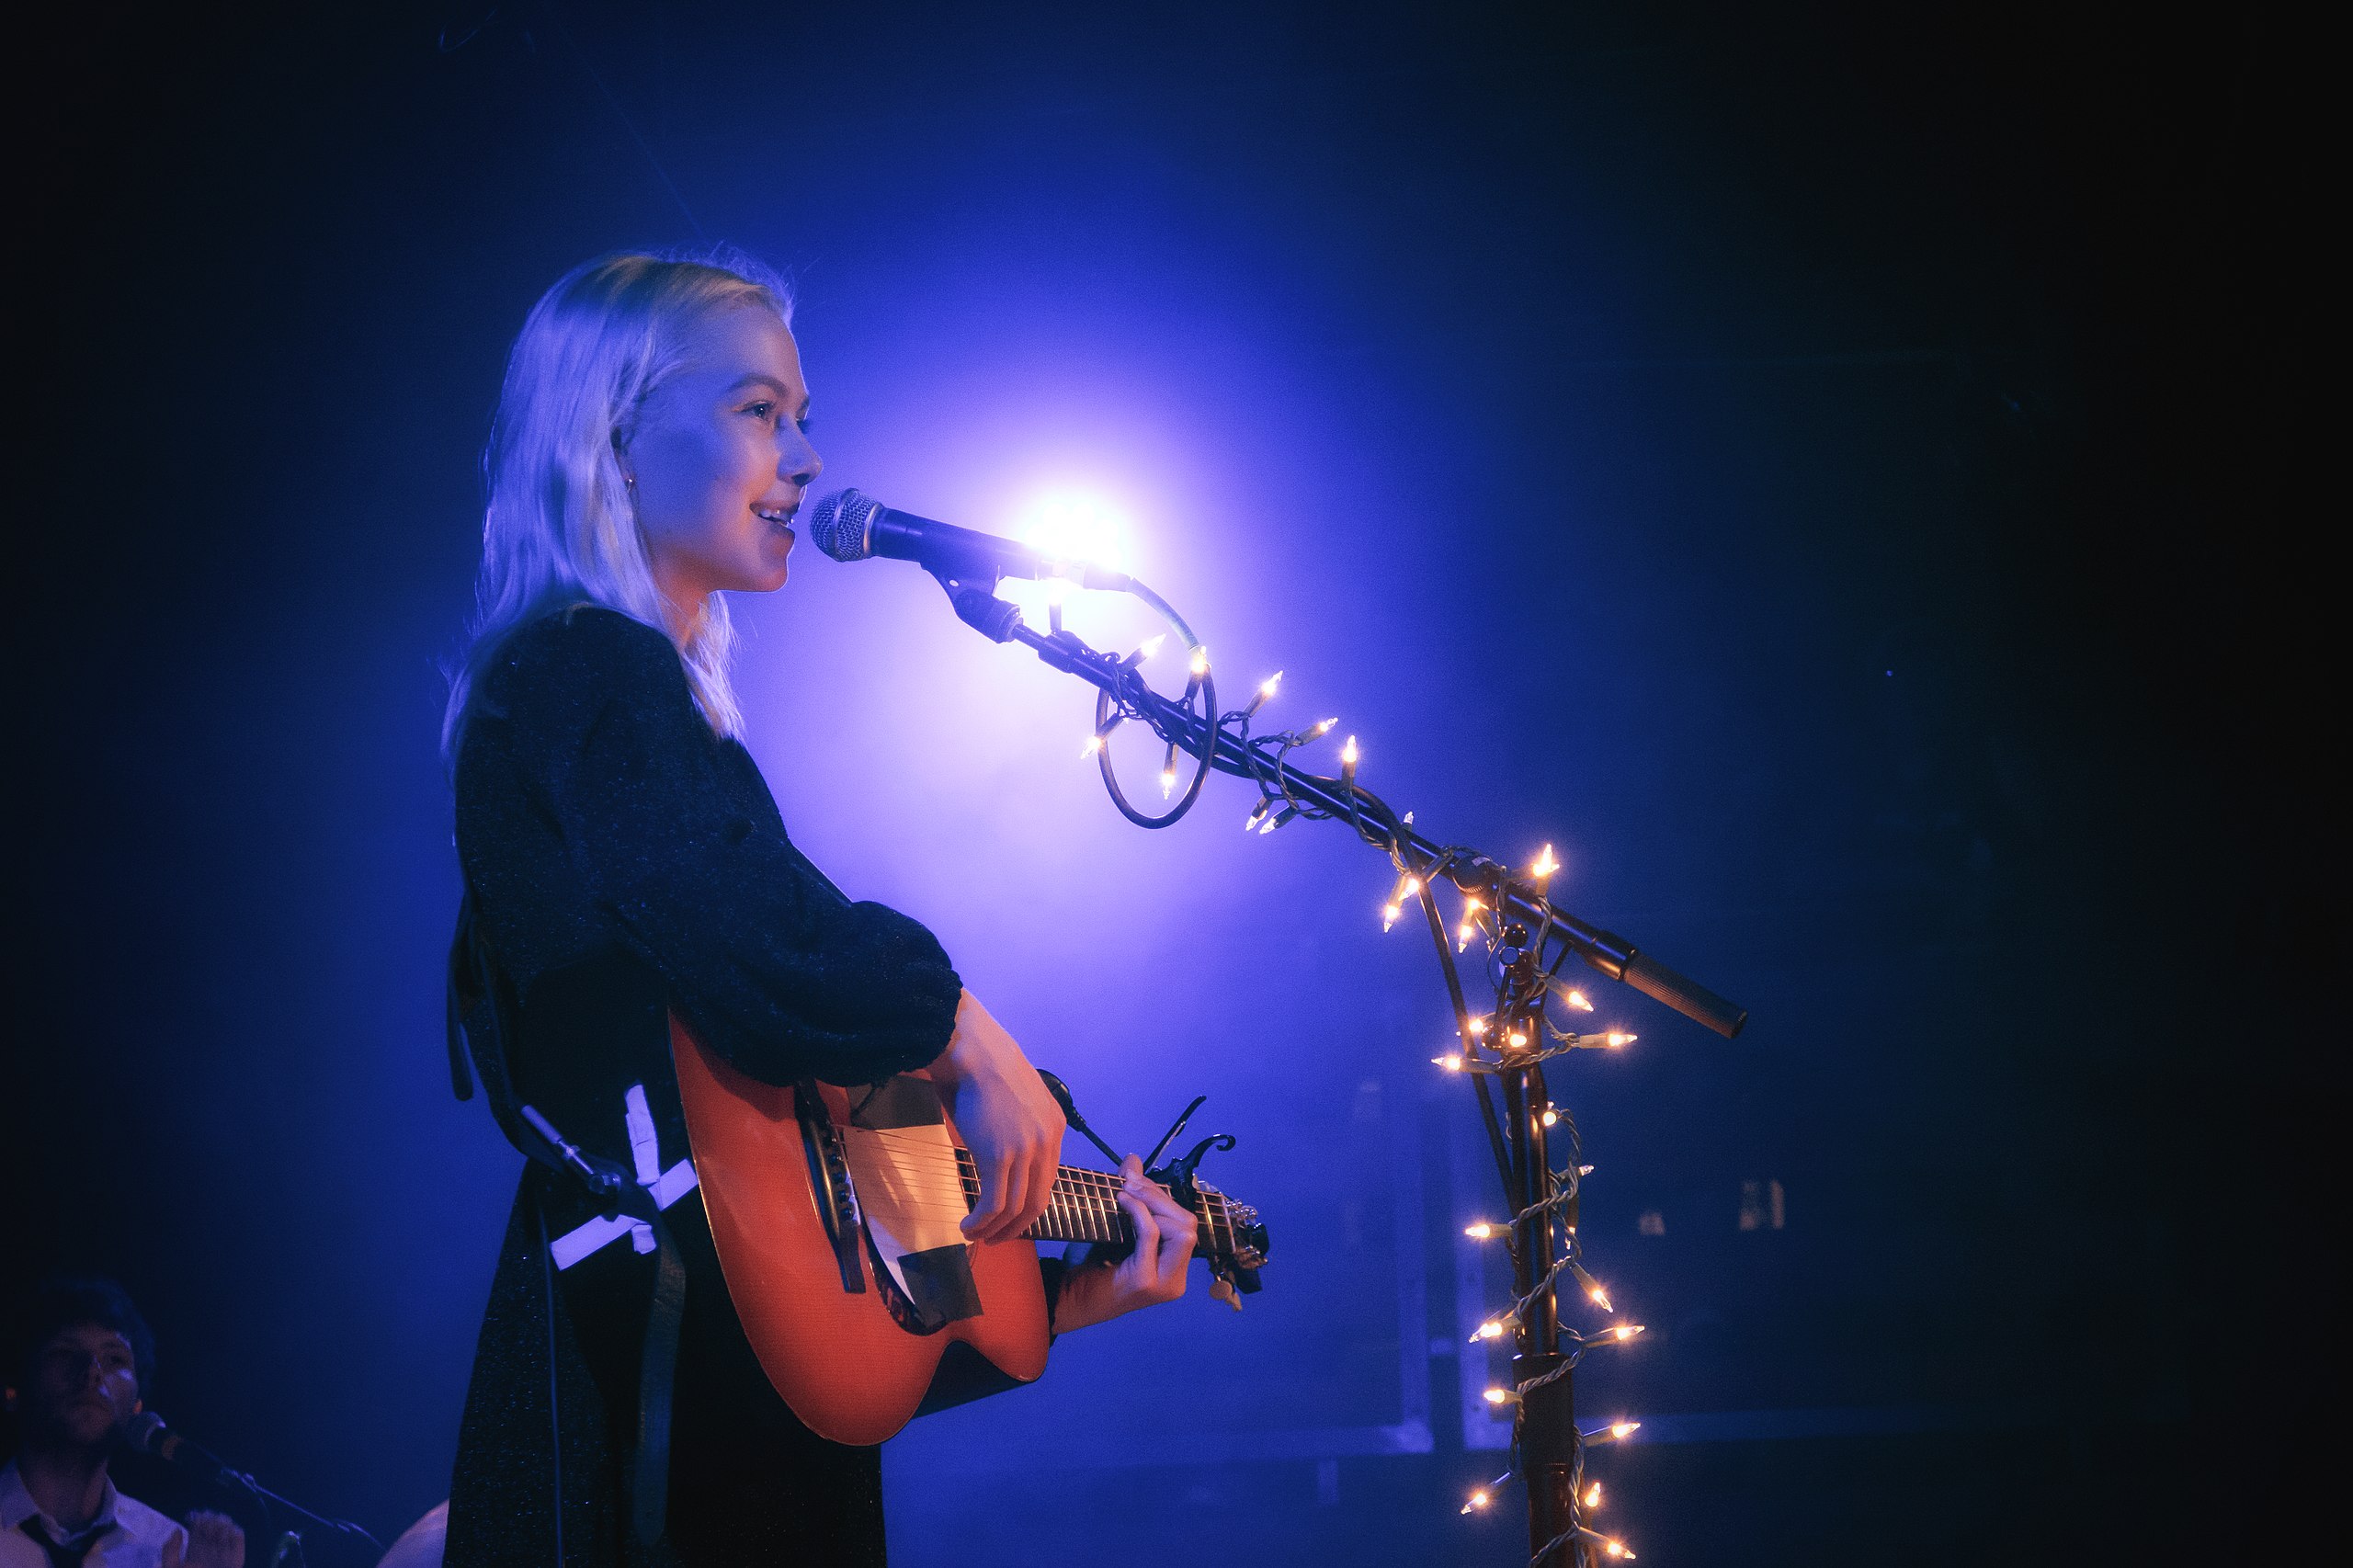 Phoebe Bridgers playing an acoustic guitar live.